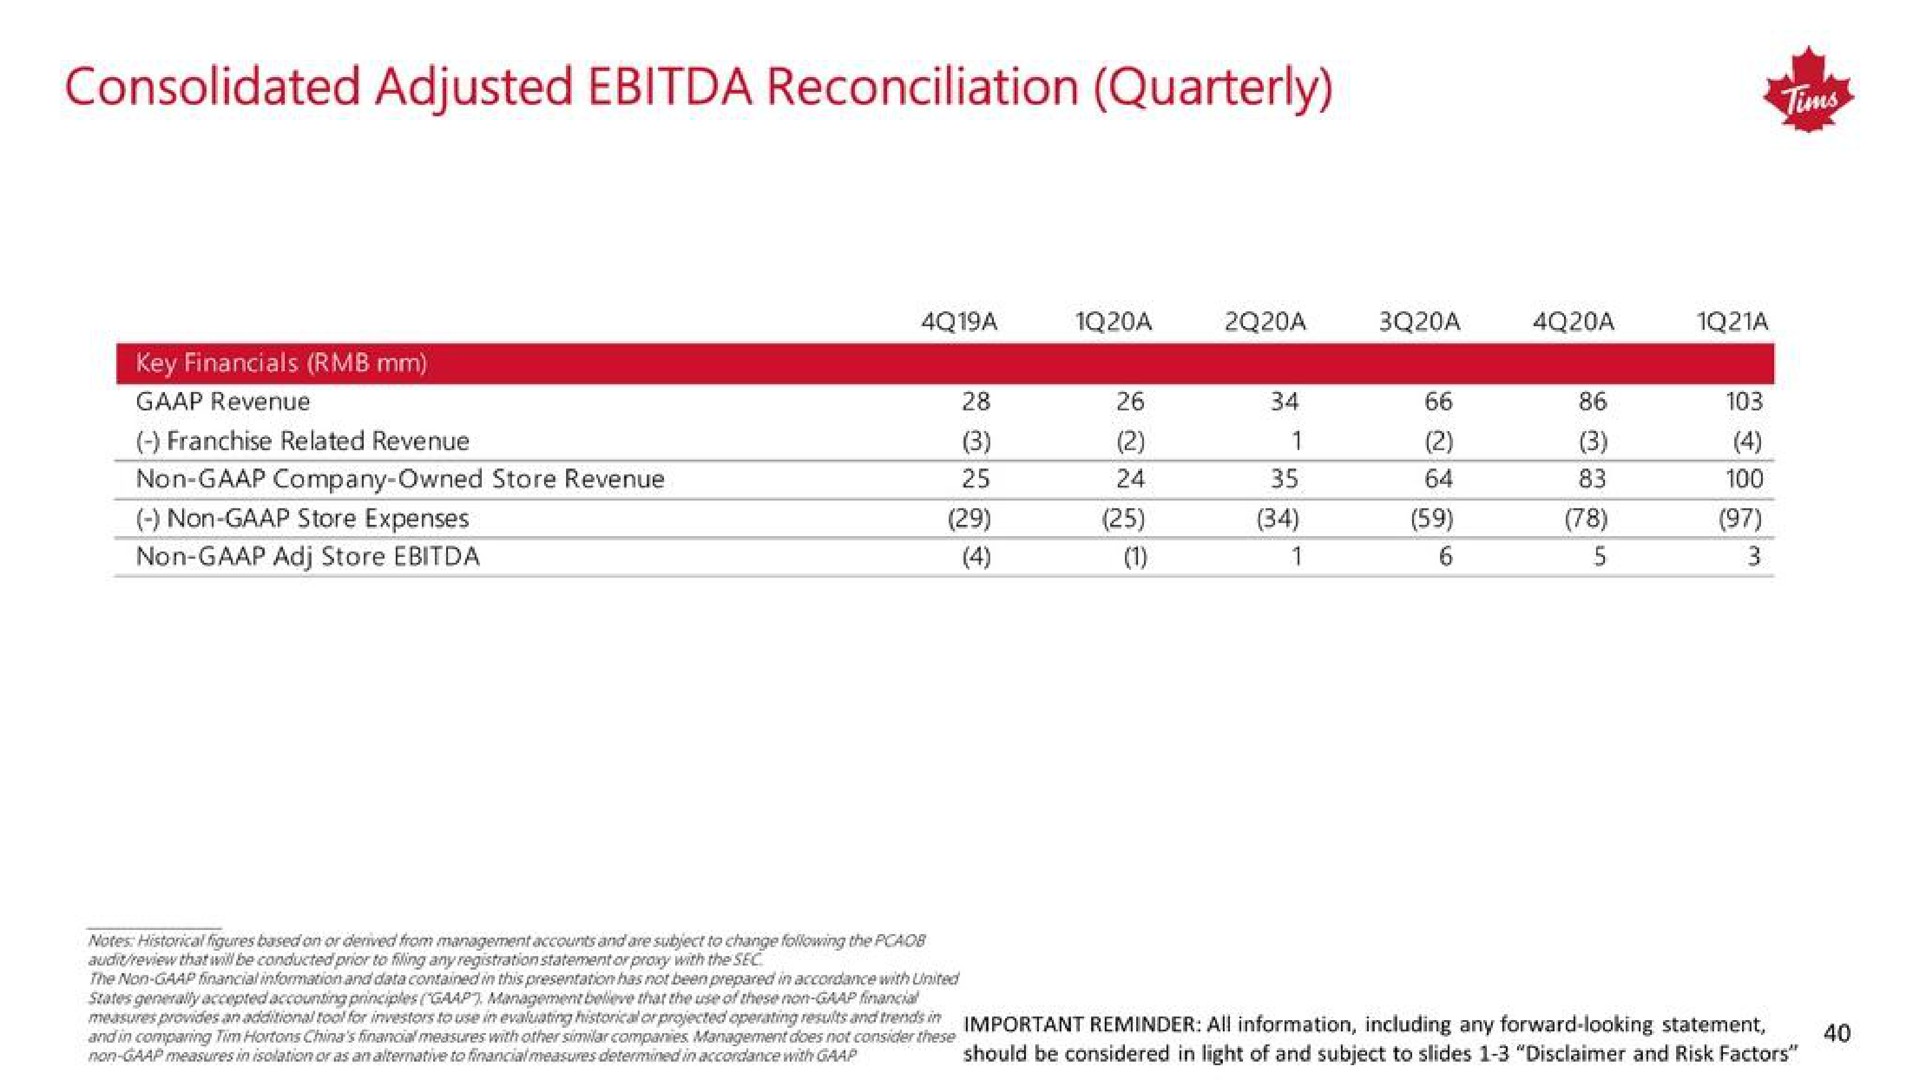 consolidated adjusted reconciliation quarterly | Tim Hortons China